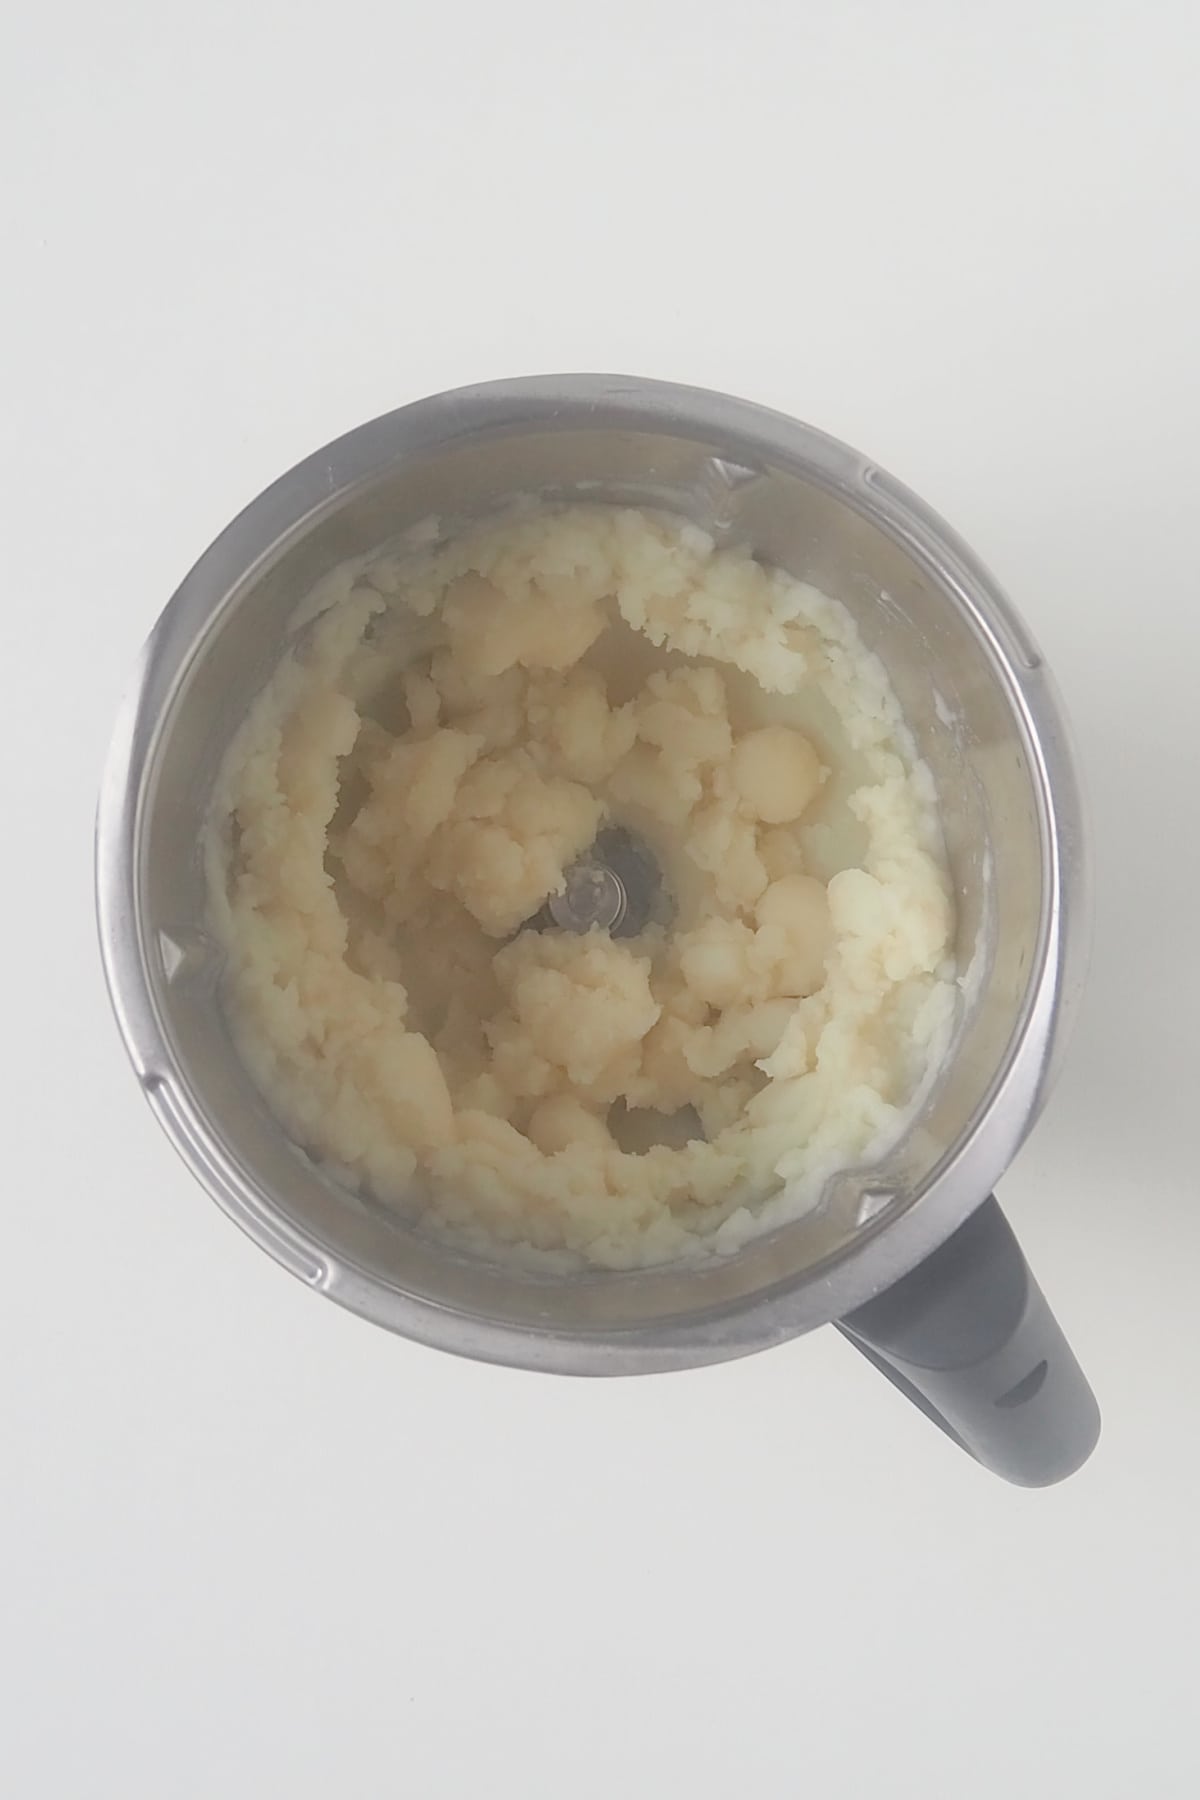 First step of making mashed potatoes in a Thermomix.